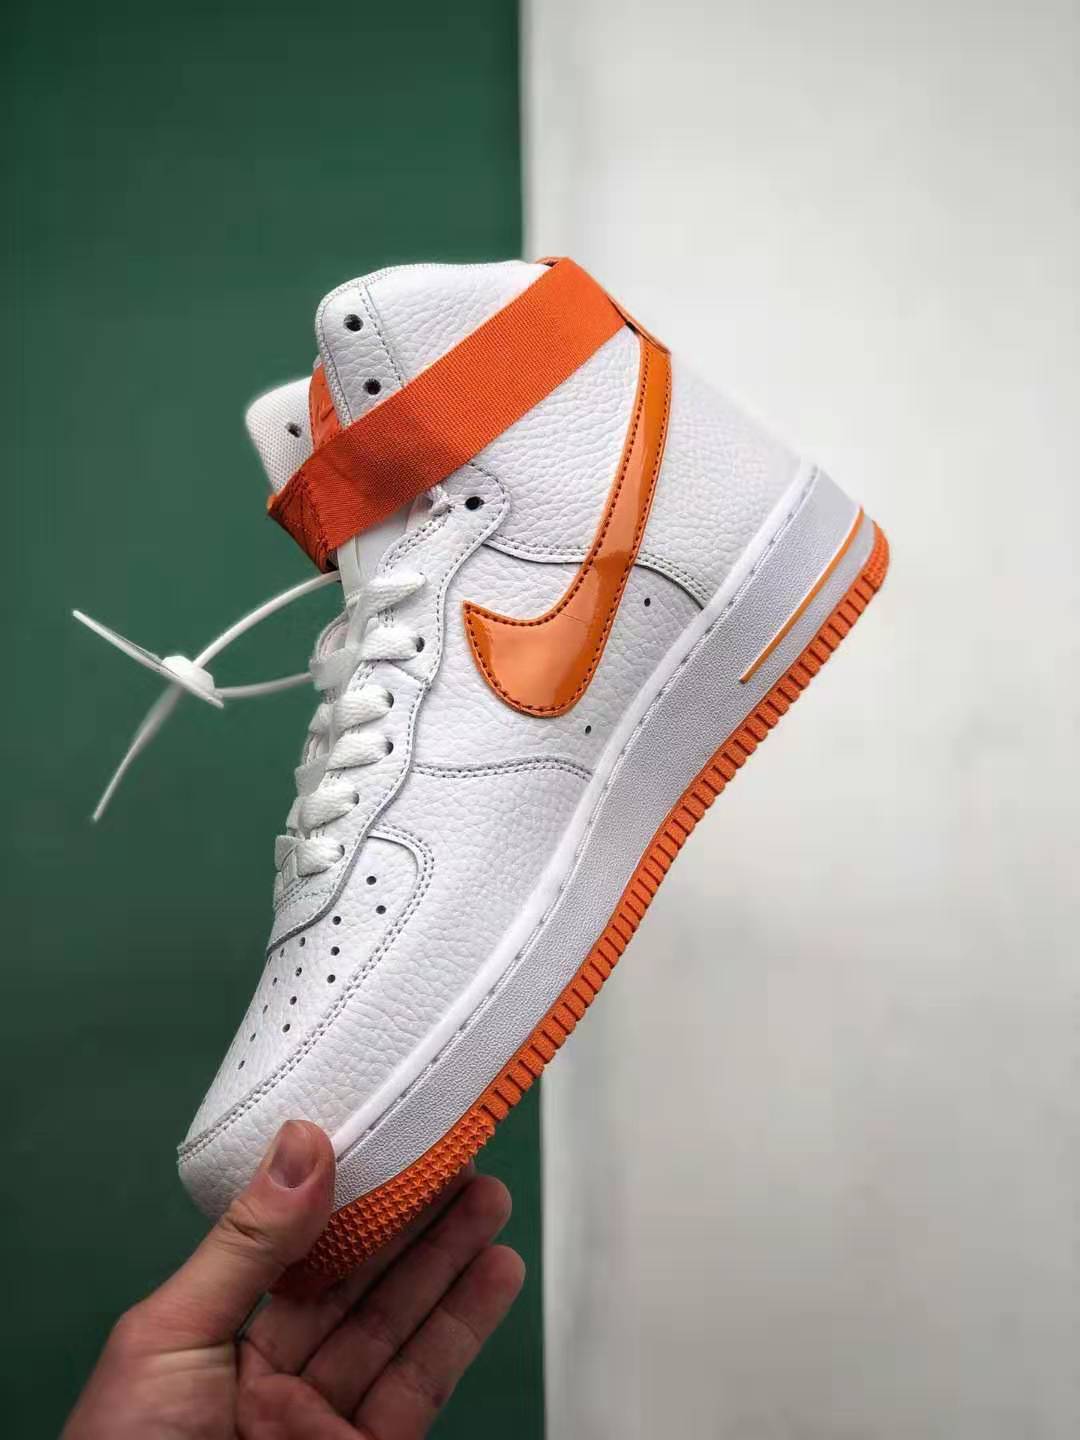 Nike Air Force 1 High 'Vibrant Orange' 334031-109 - Shop the Iconic Sneaker Now!